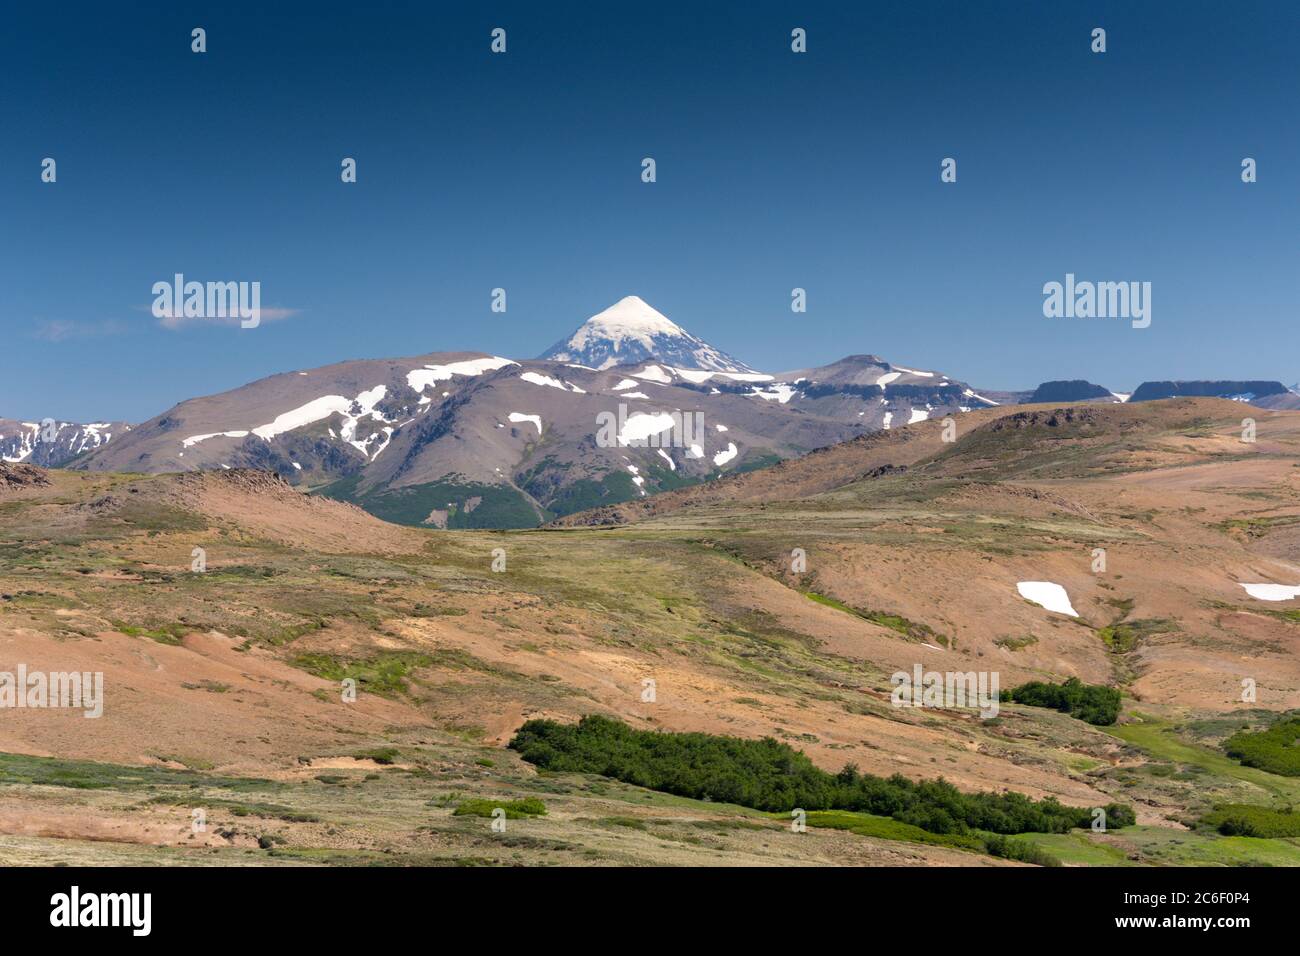 View of Volcan Lanin from Cerro Colorado near San Martin de los Andes in the Argentinian Andes Stock Photo